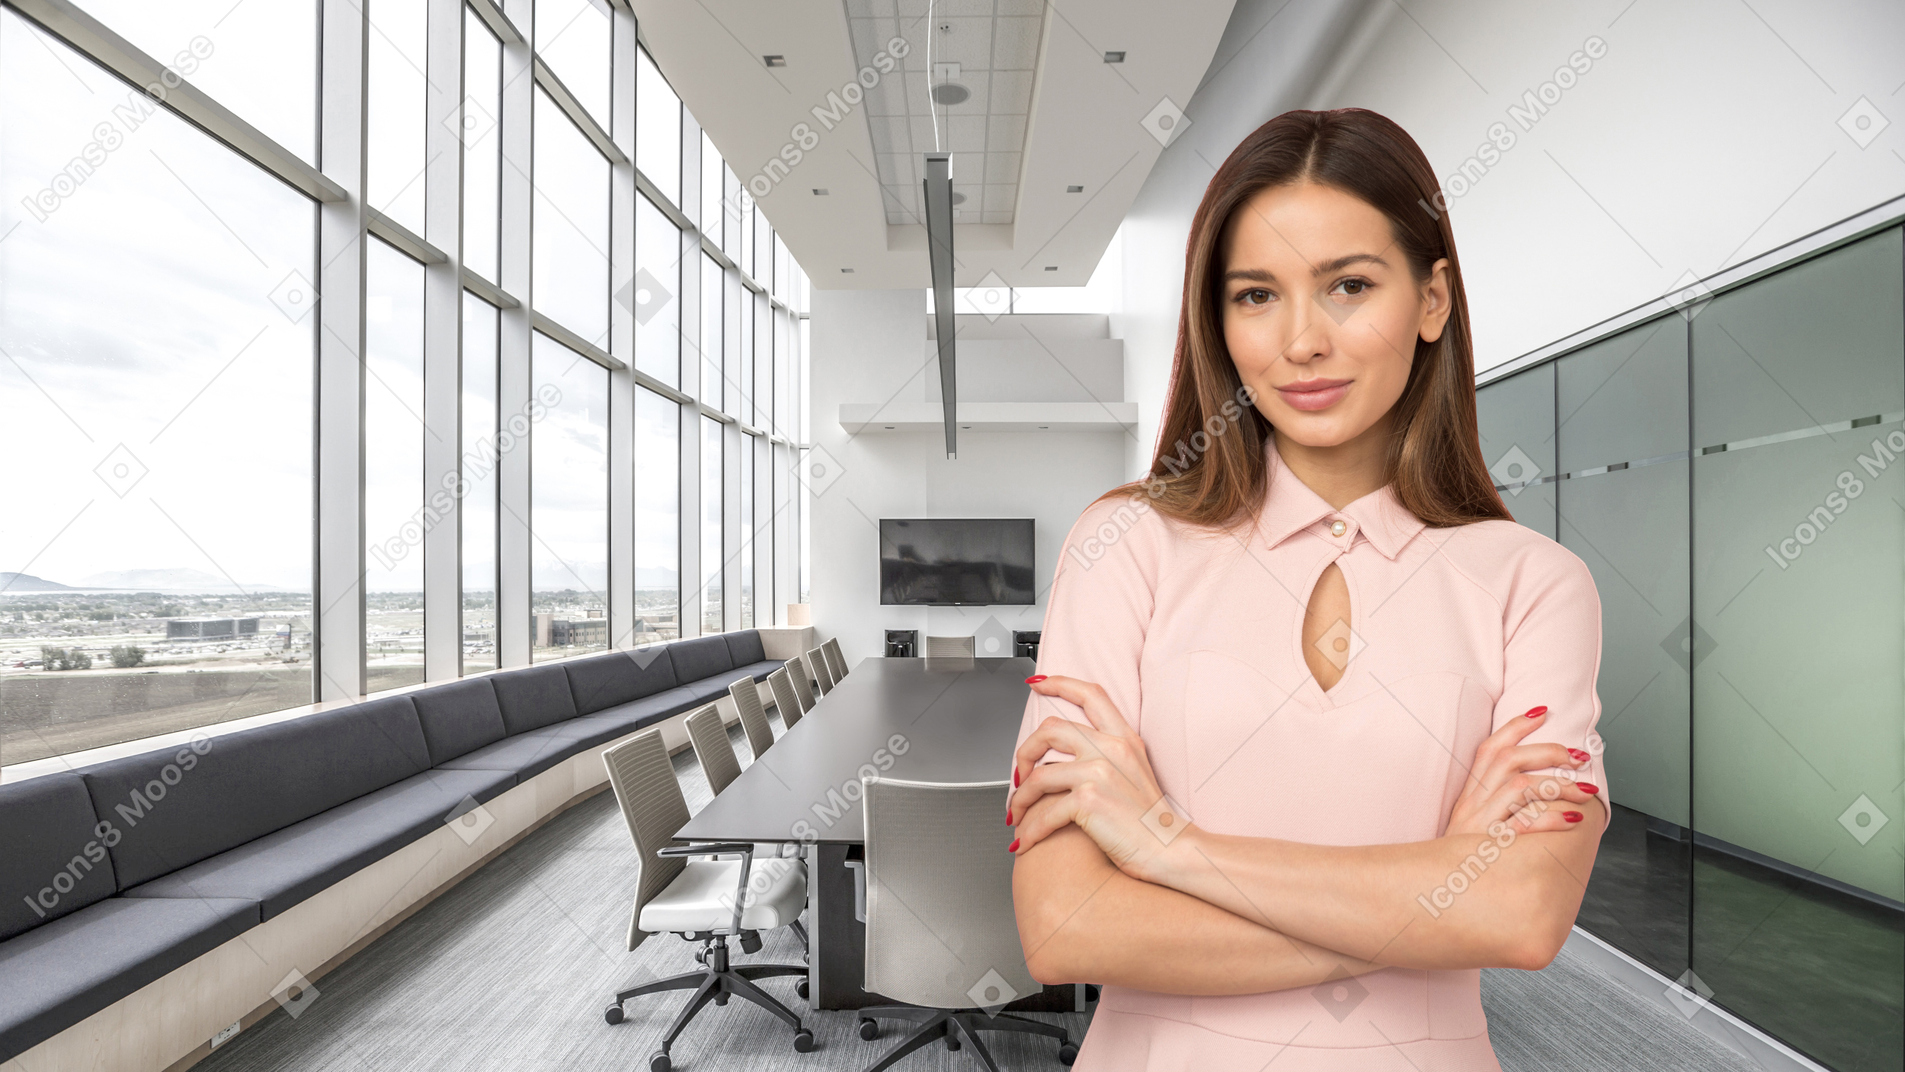 A business woman standing in front of a conference room